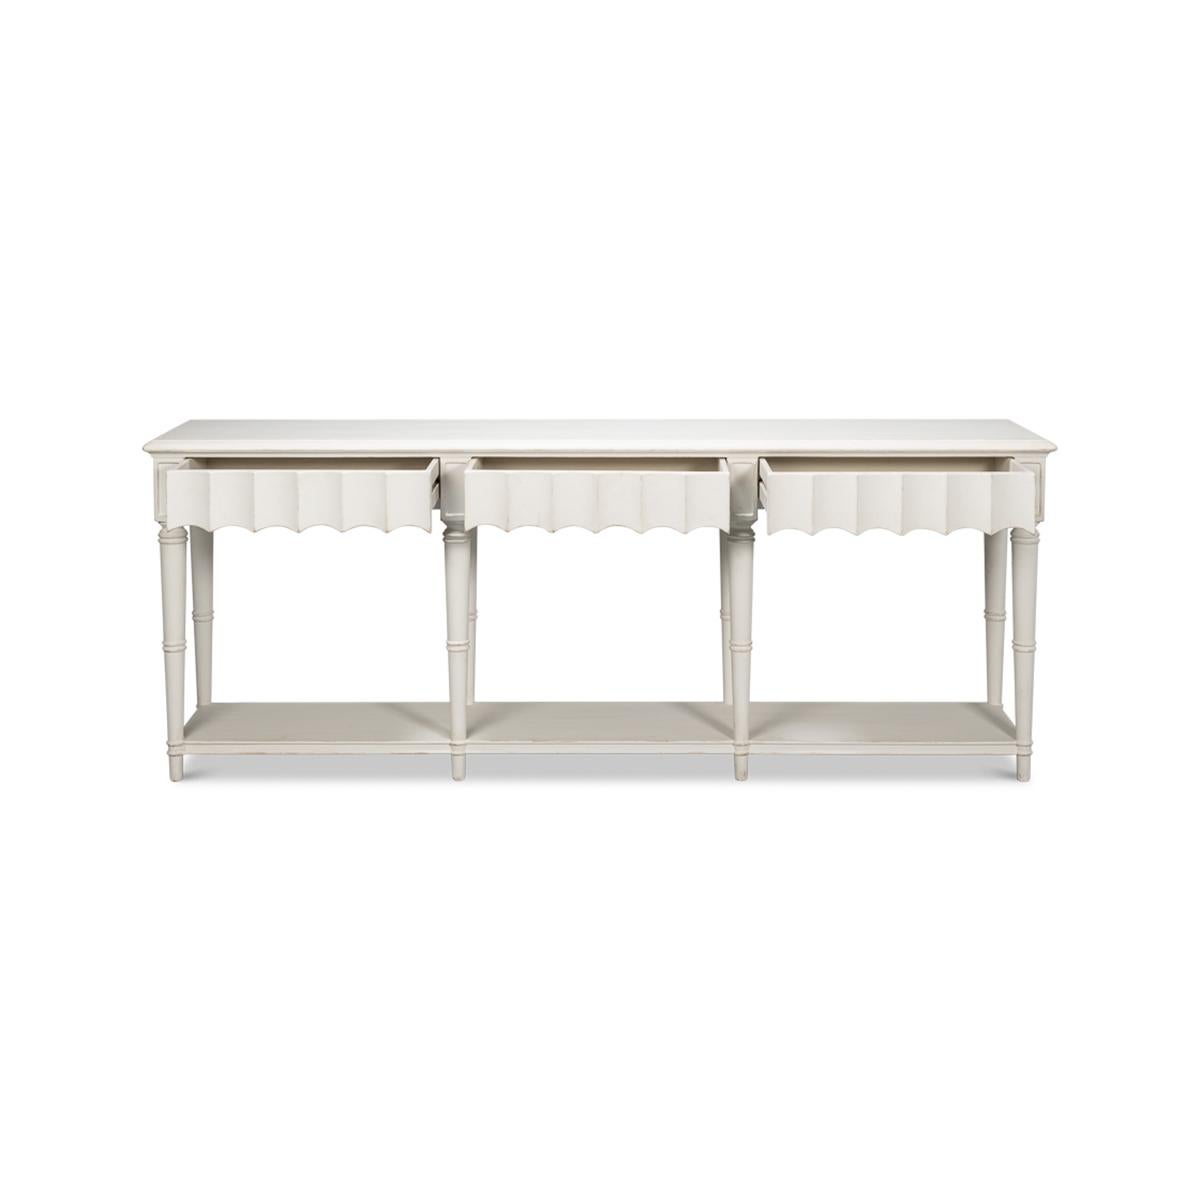 French Provincial Large French Country Console Table, Antique White For Sale